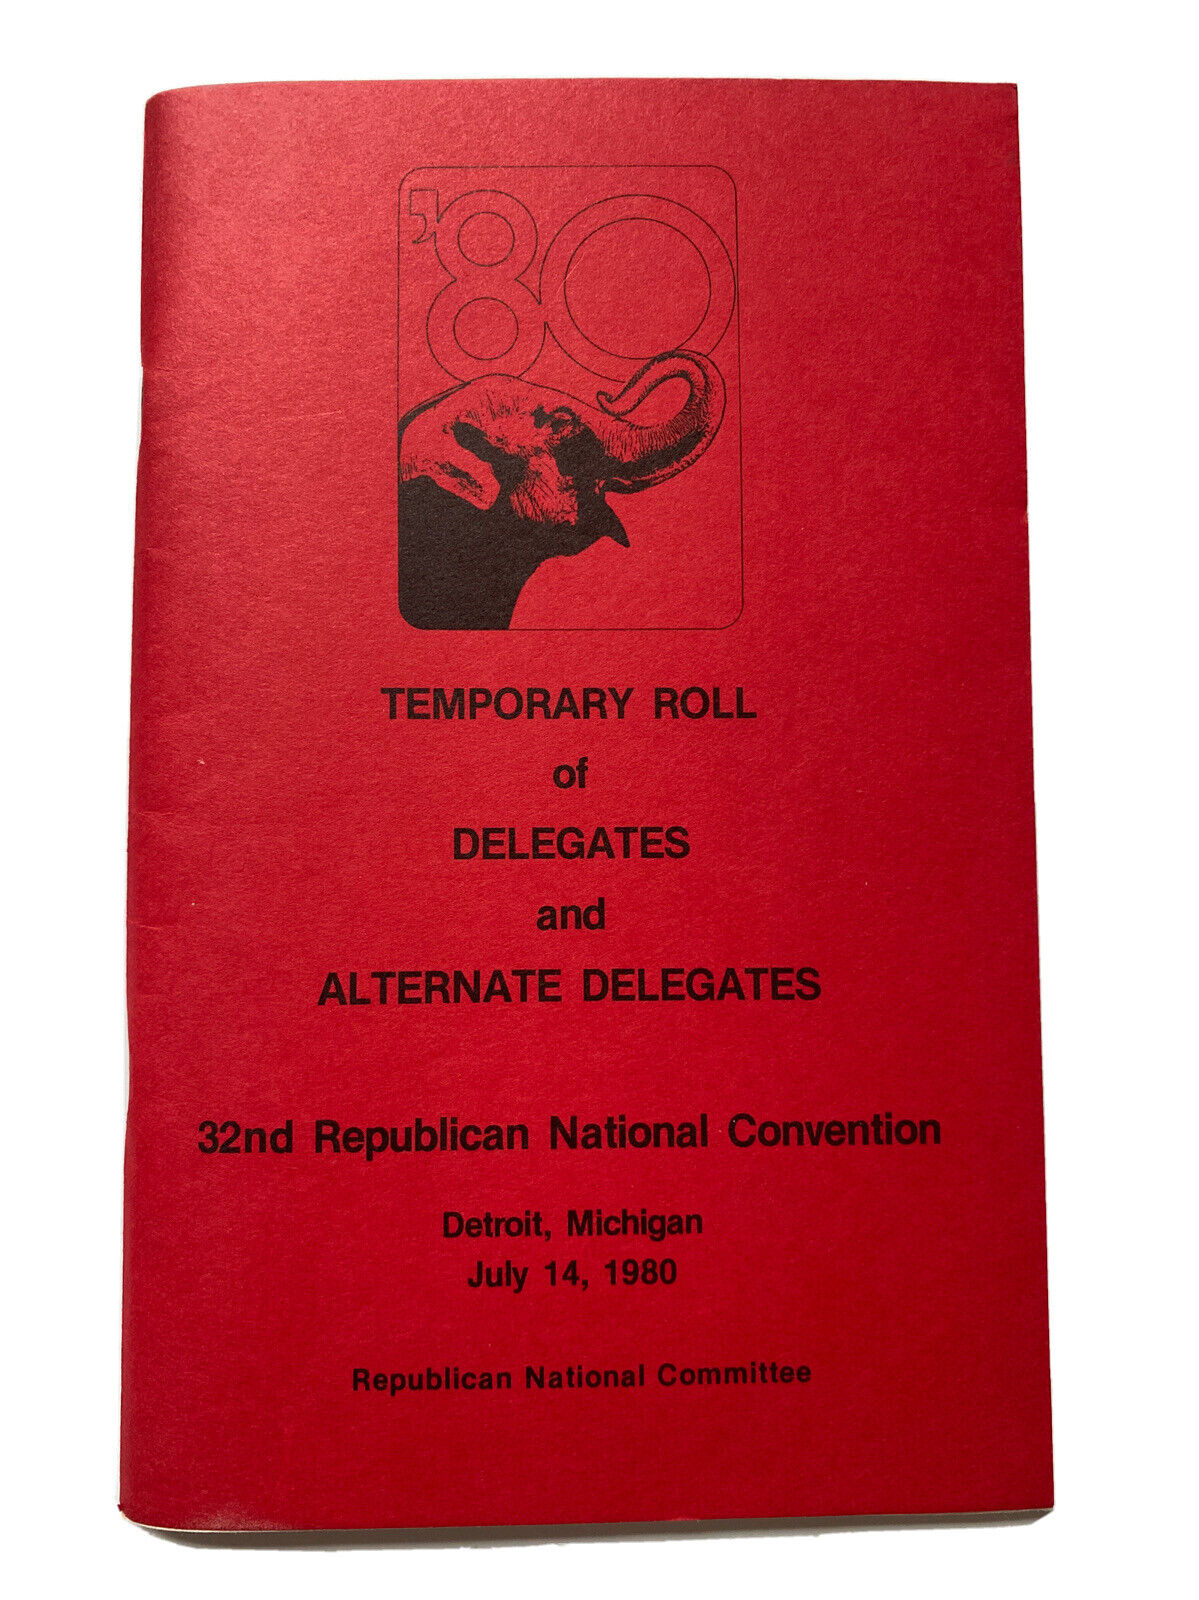 1980 Republican National Convention Ronald Reagan Temporary Roll of Delegates